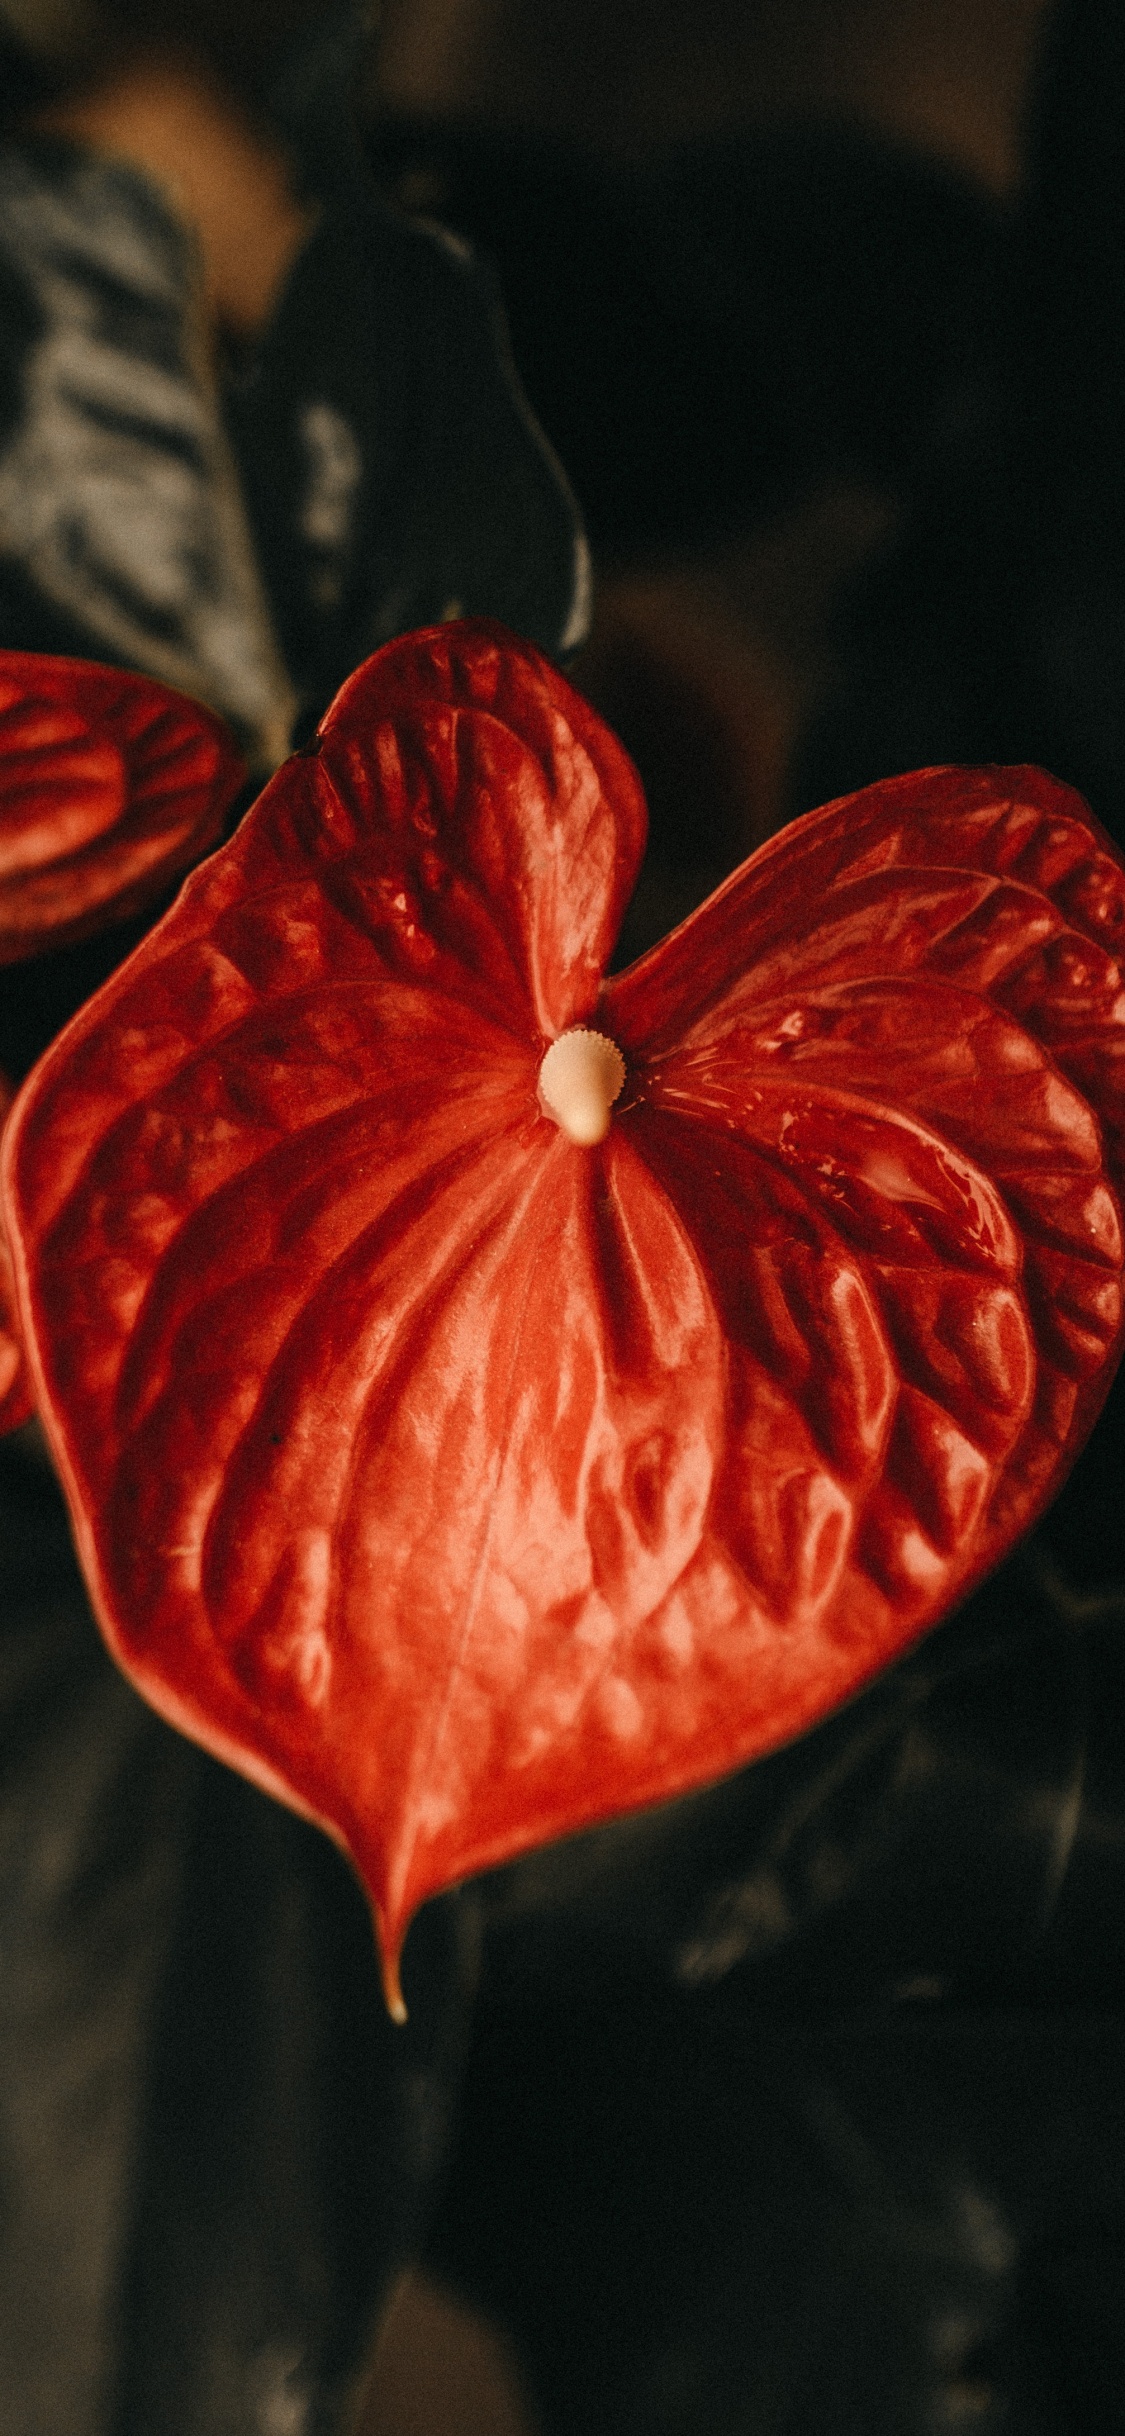 Red 5 Petal Flower in Close up Photography. Wallpaper in 1125x2436 Resolution